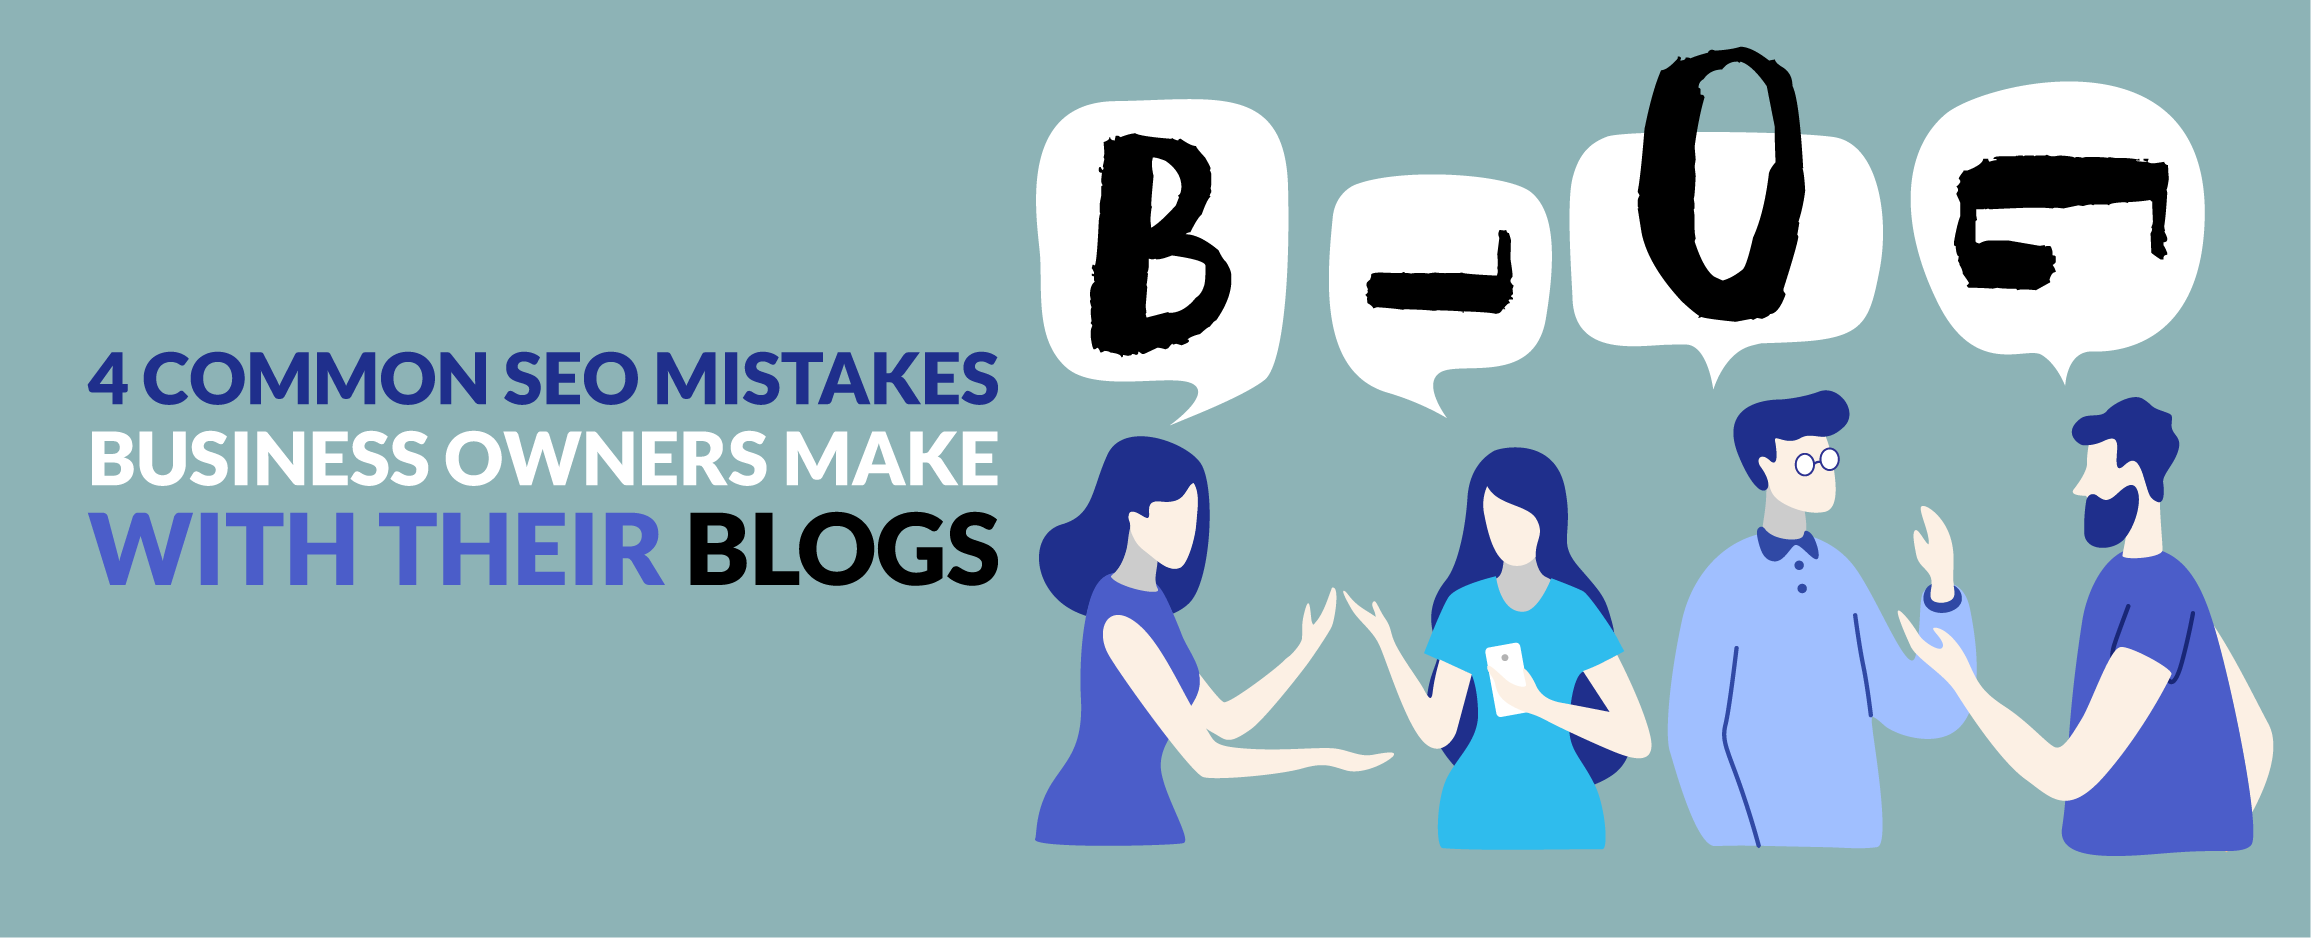 4 Common SEO Mistakes Business Owners Make with their Blogs